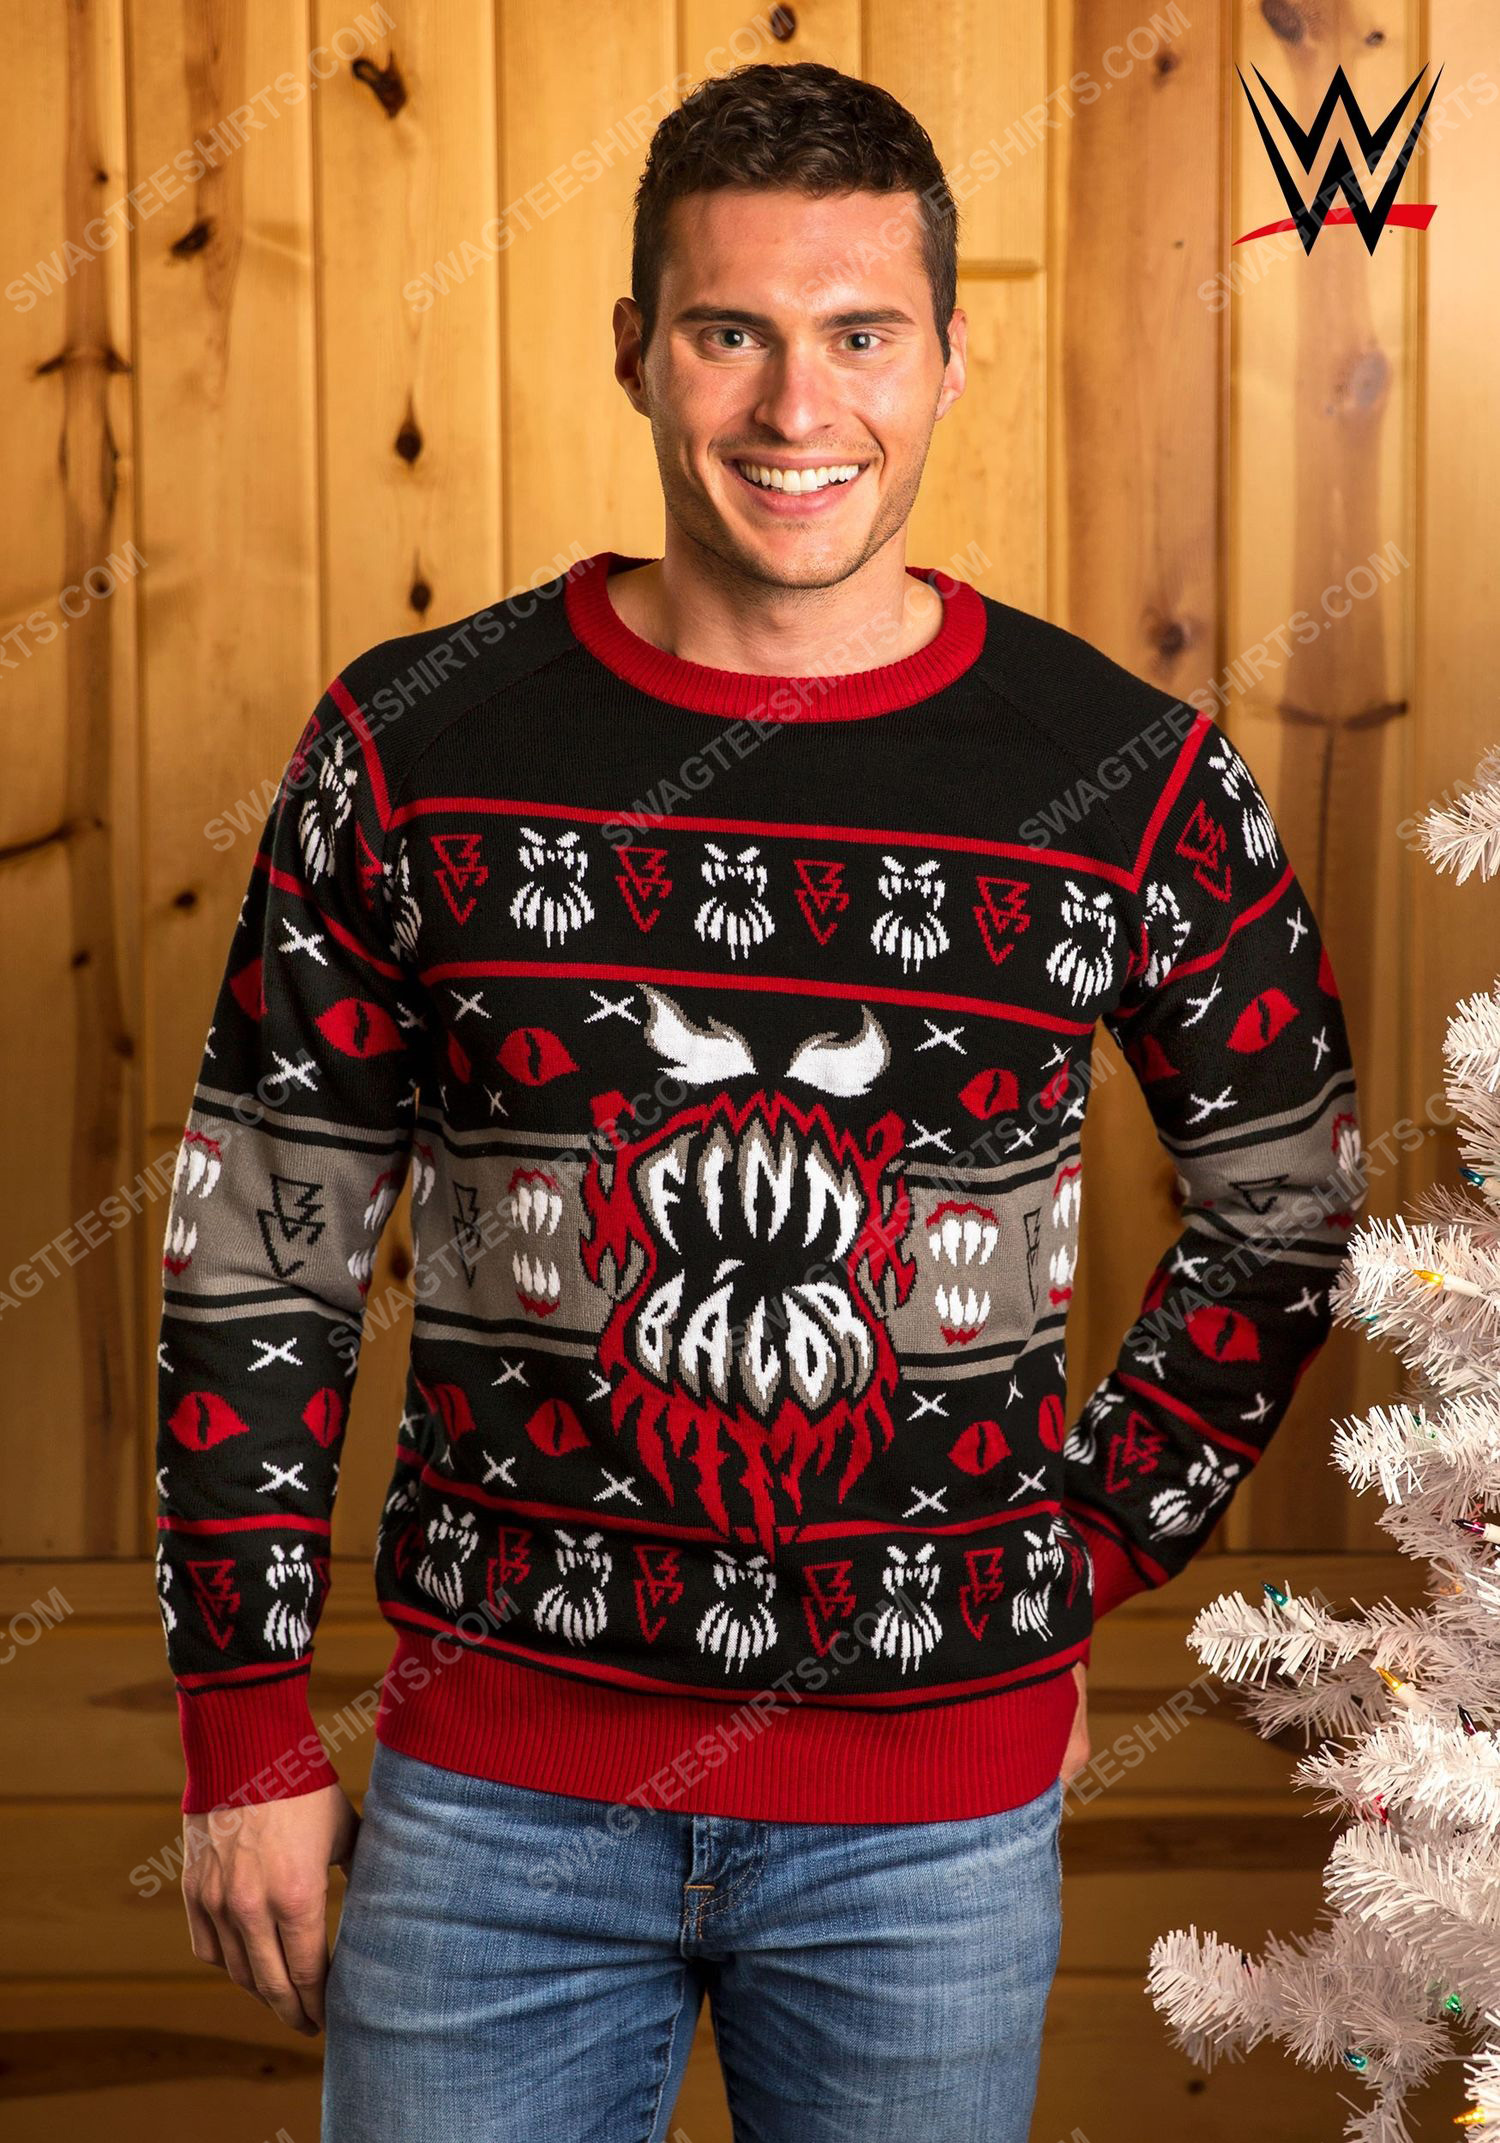 [special edition] WWE finn balor full print ugly christmas sweater – maria